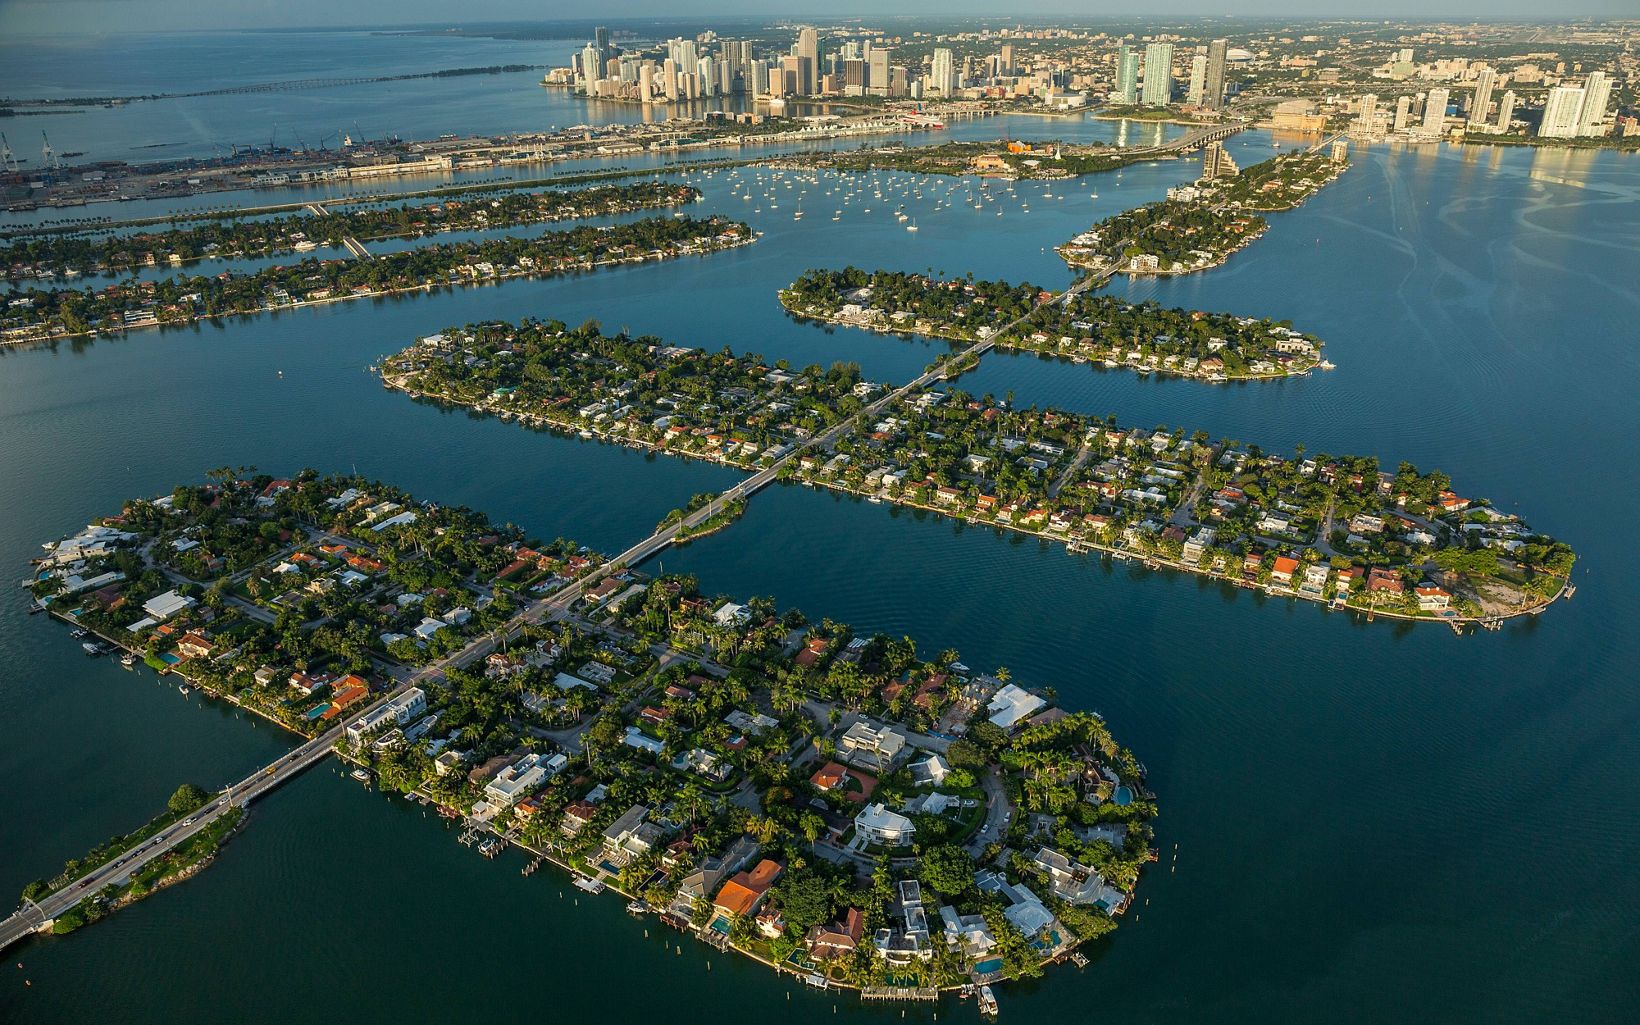 Above Water The Venetian Islands, a chain of human-made islands in Florida’s Biscayne Bay covered with multimillion-dollar homes, sit just 1 to 2 feet above sea level and are especially vulnerable to storm surges. © George Steinmetz